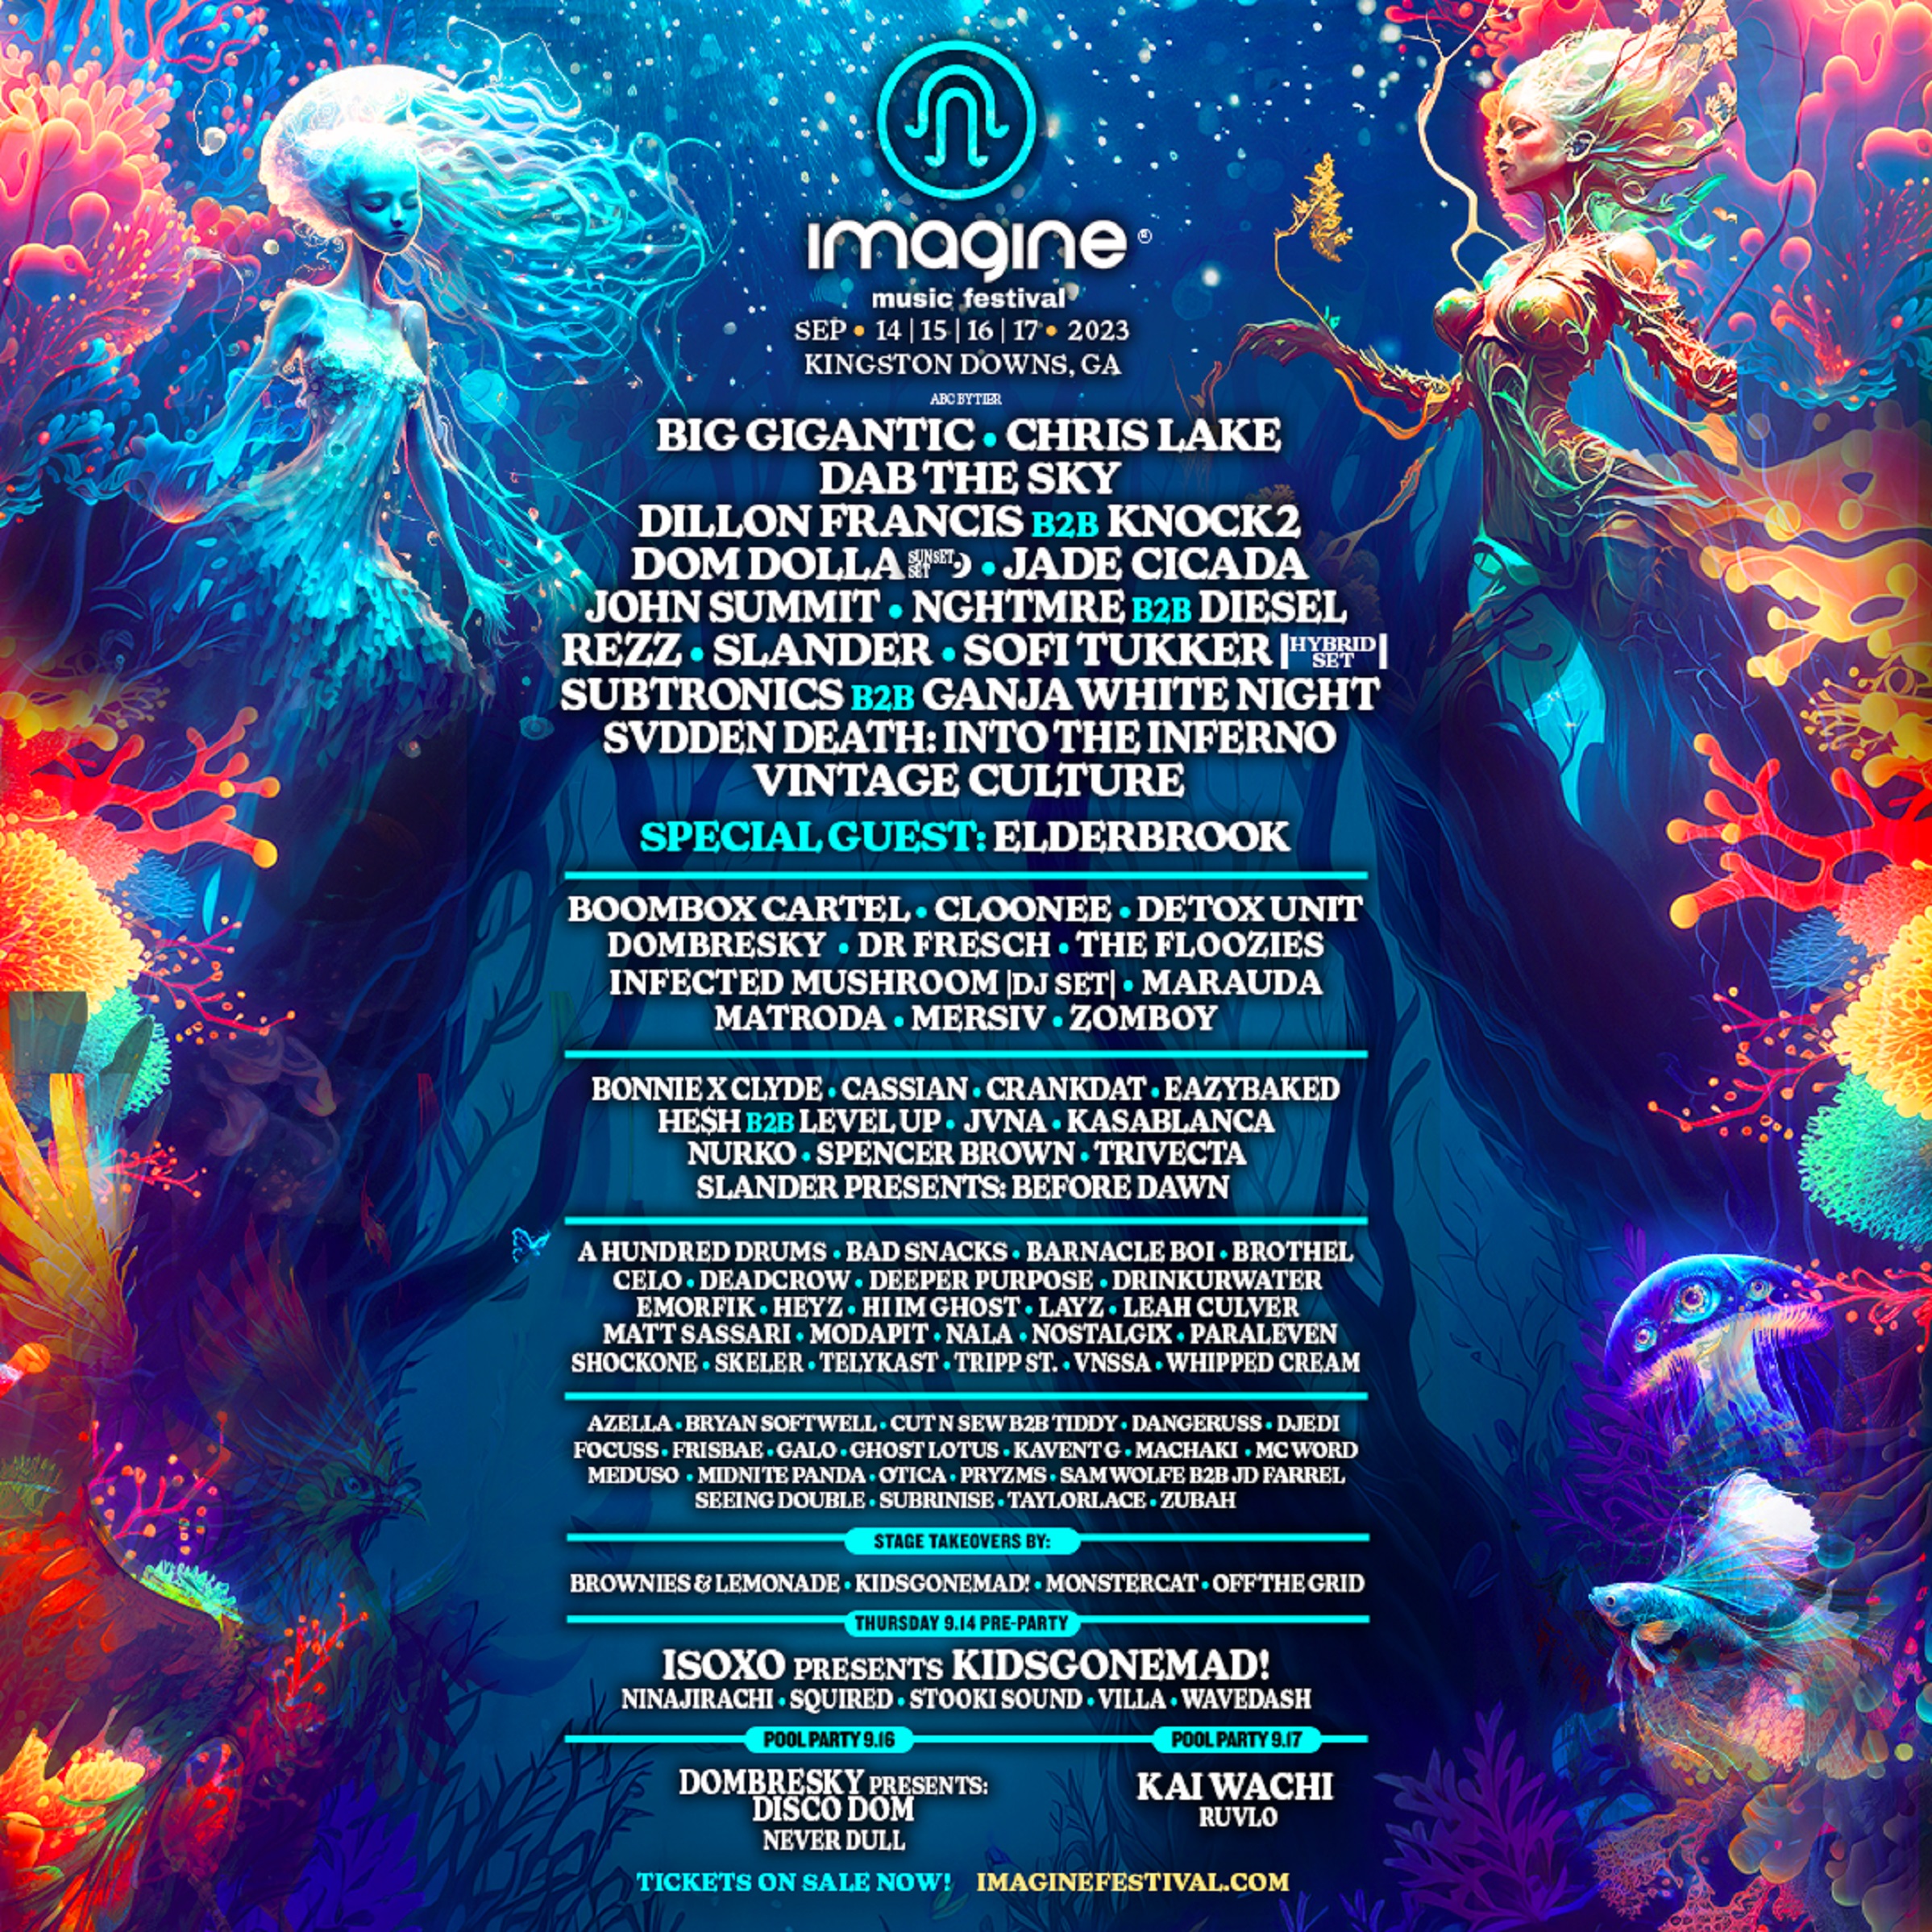 Imagine Music Festival Announces Phase Two Lineup for 2023 Edition